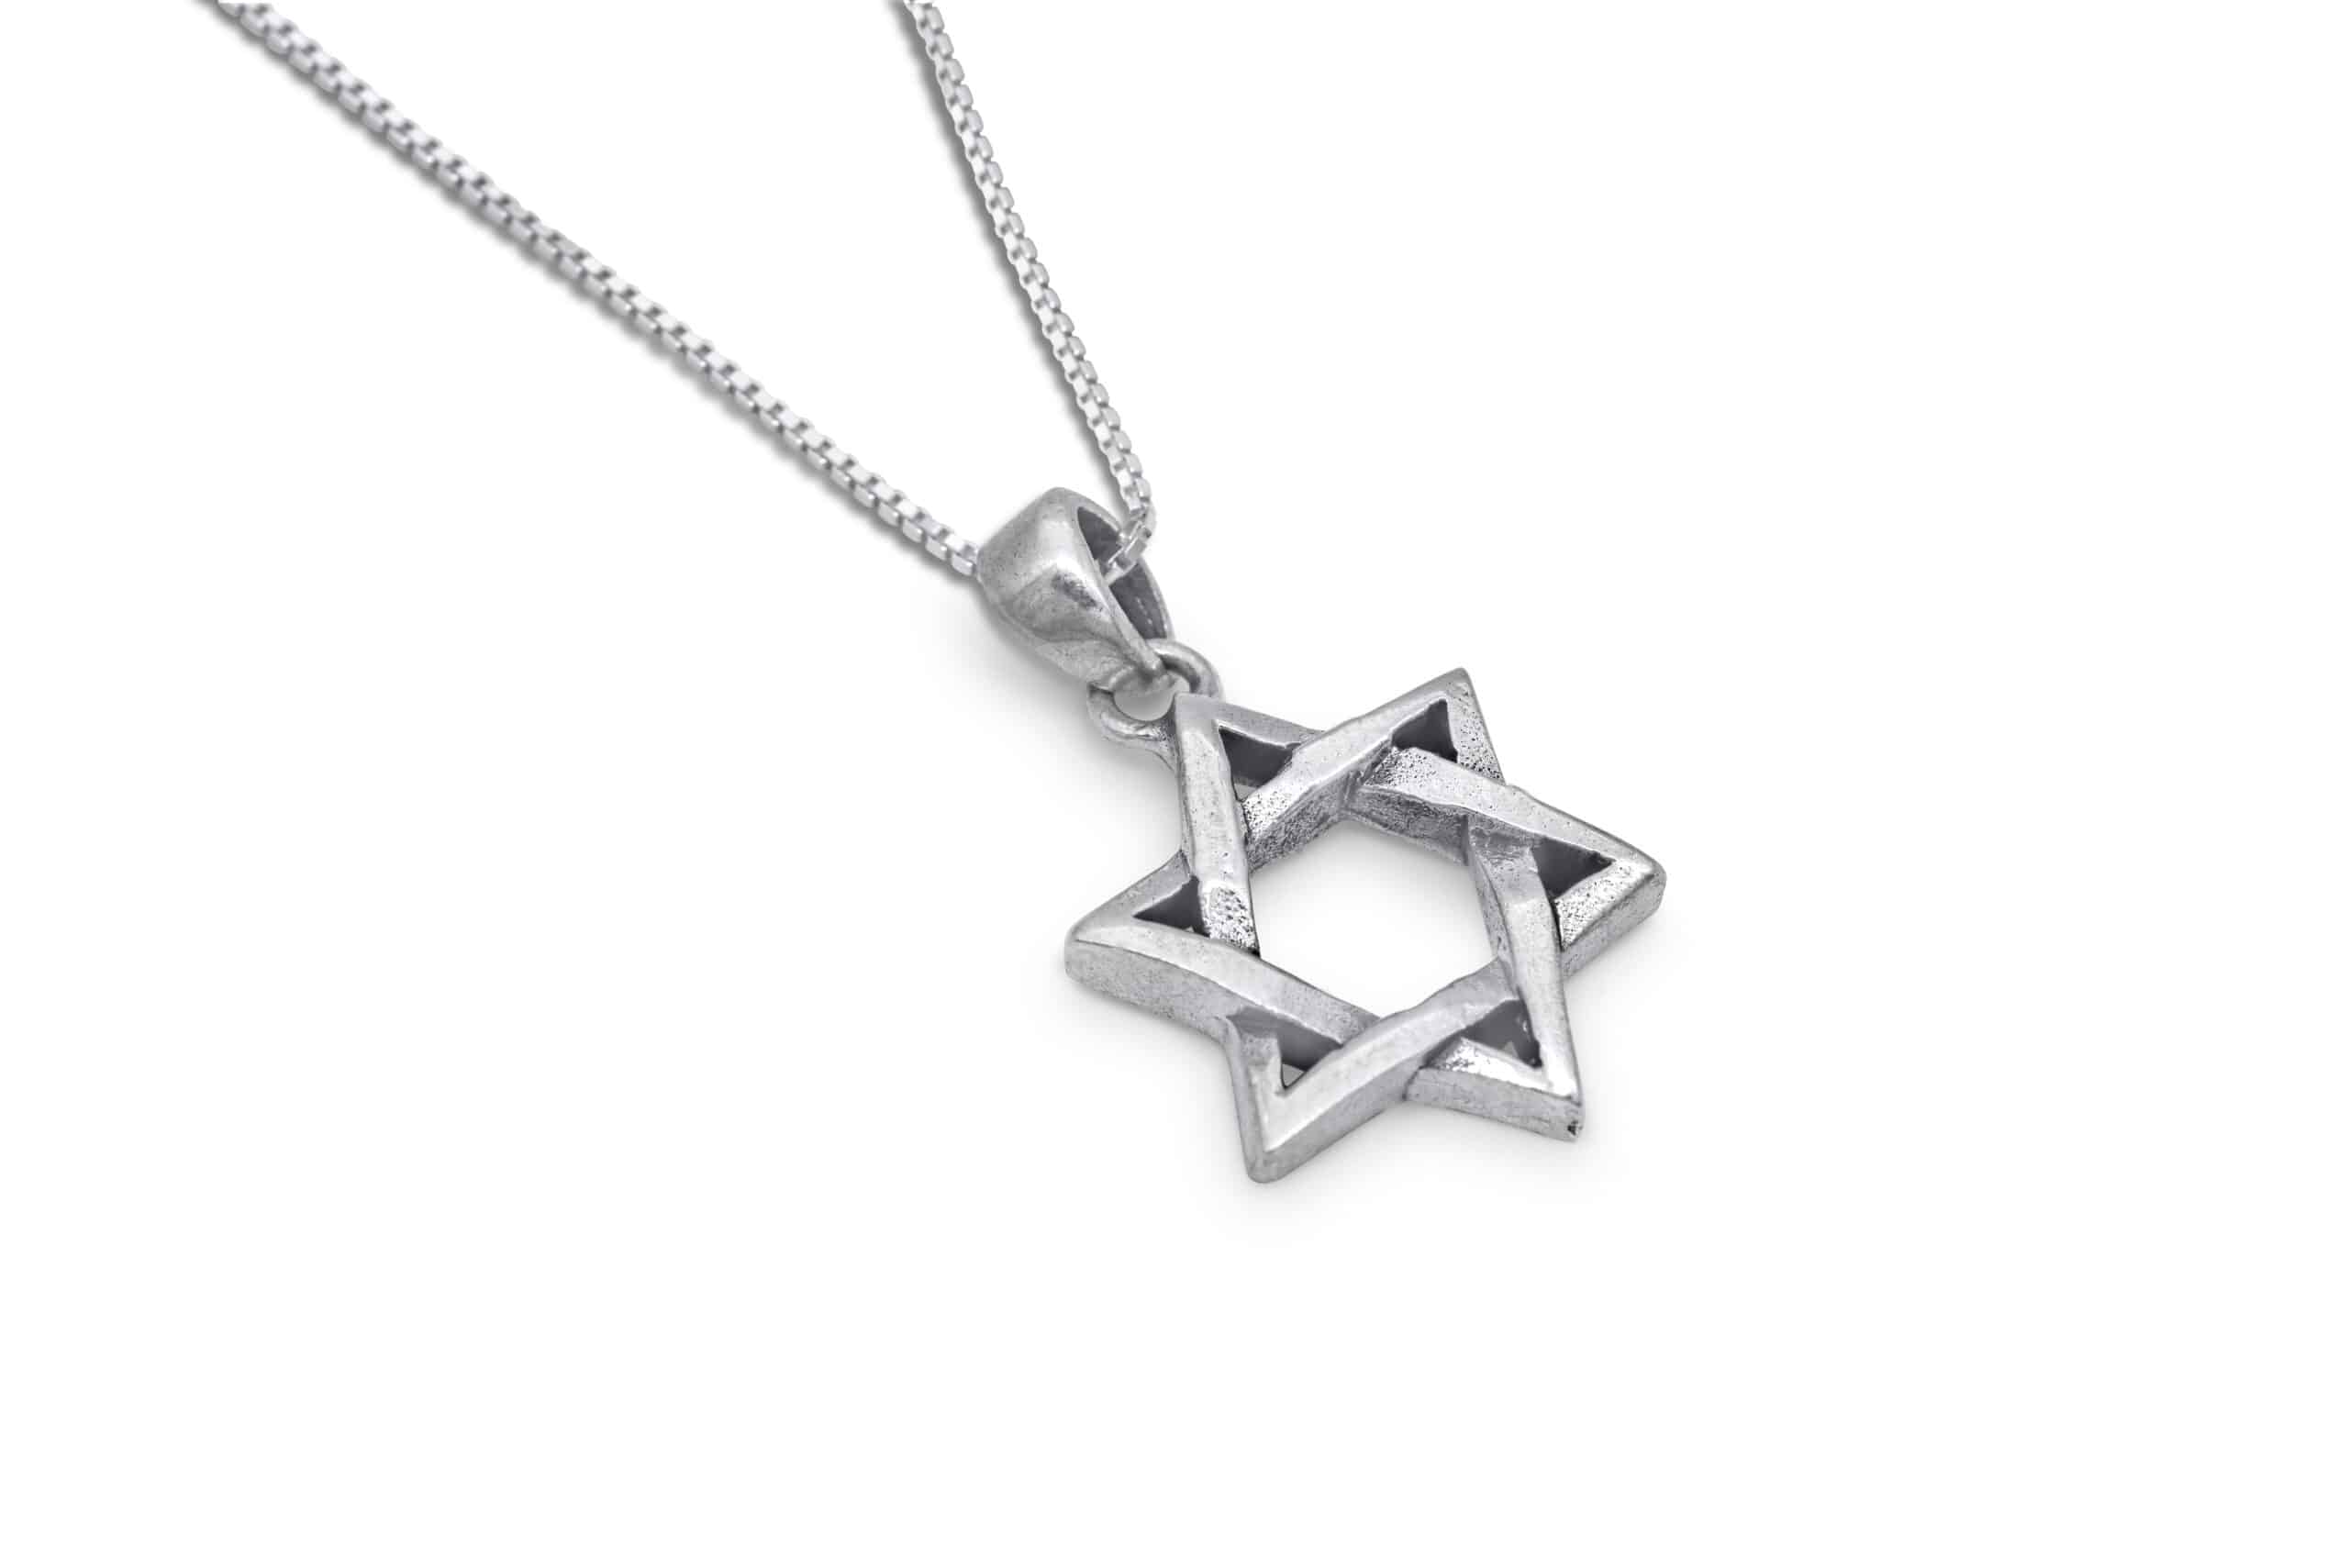 Large Braided Star of David Silver Pendant